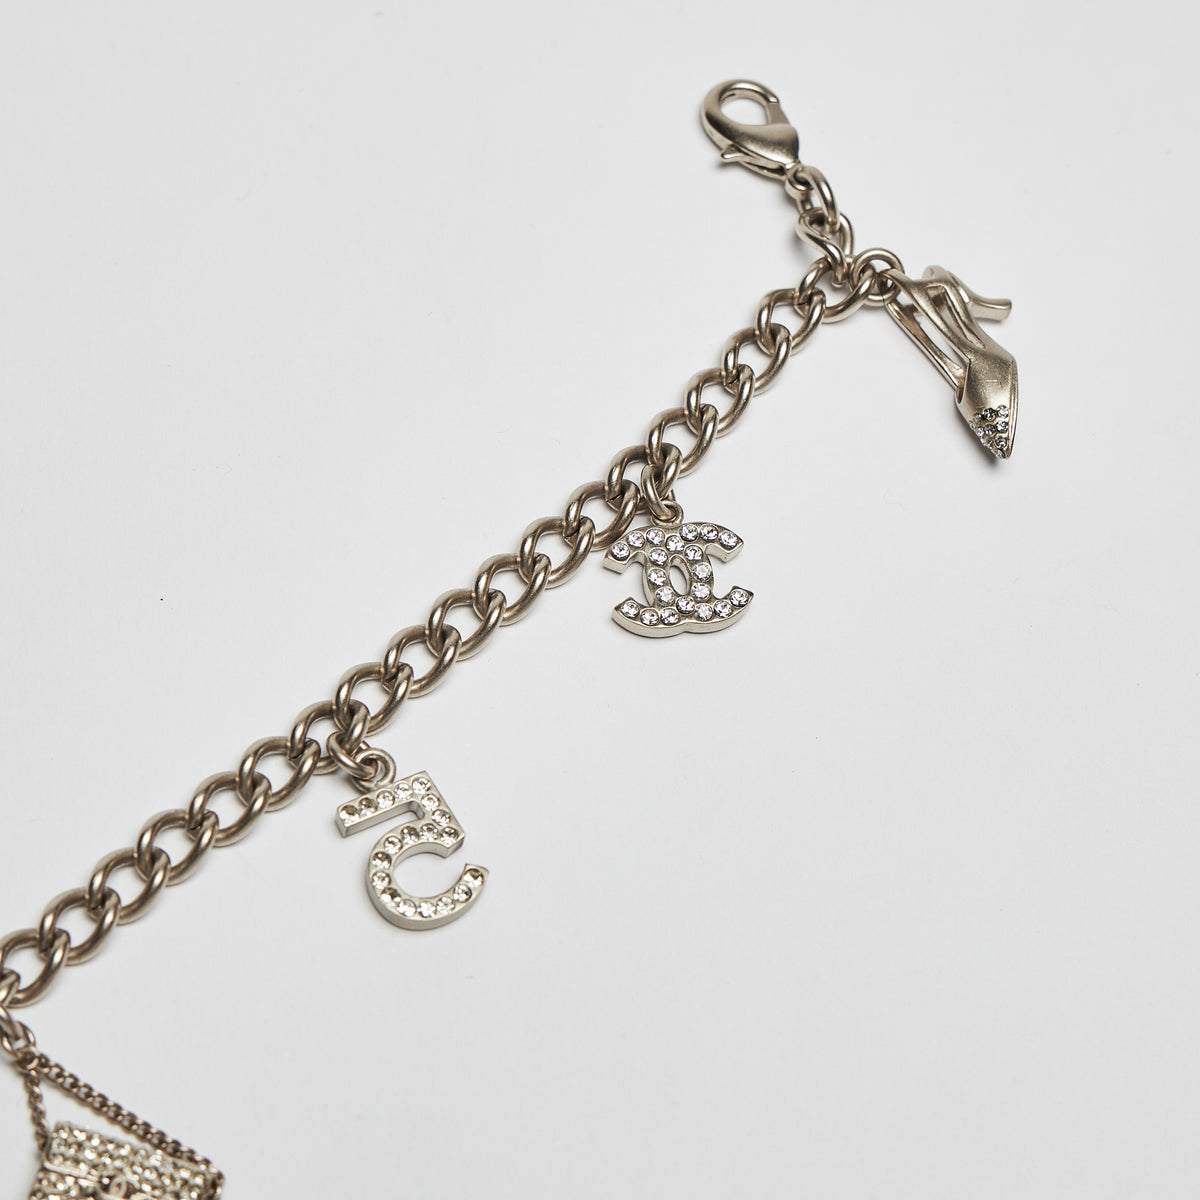 Excellent Pre-Loved Aged Champagne Gold Tone Chain Bracelet with Crystal Embellished iconic Charms.(charms)